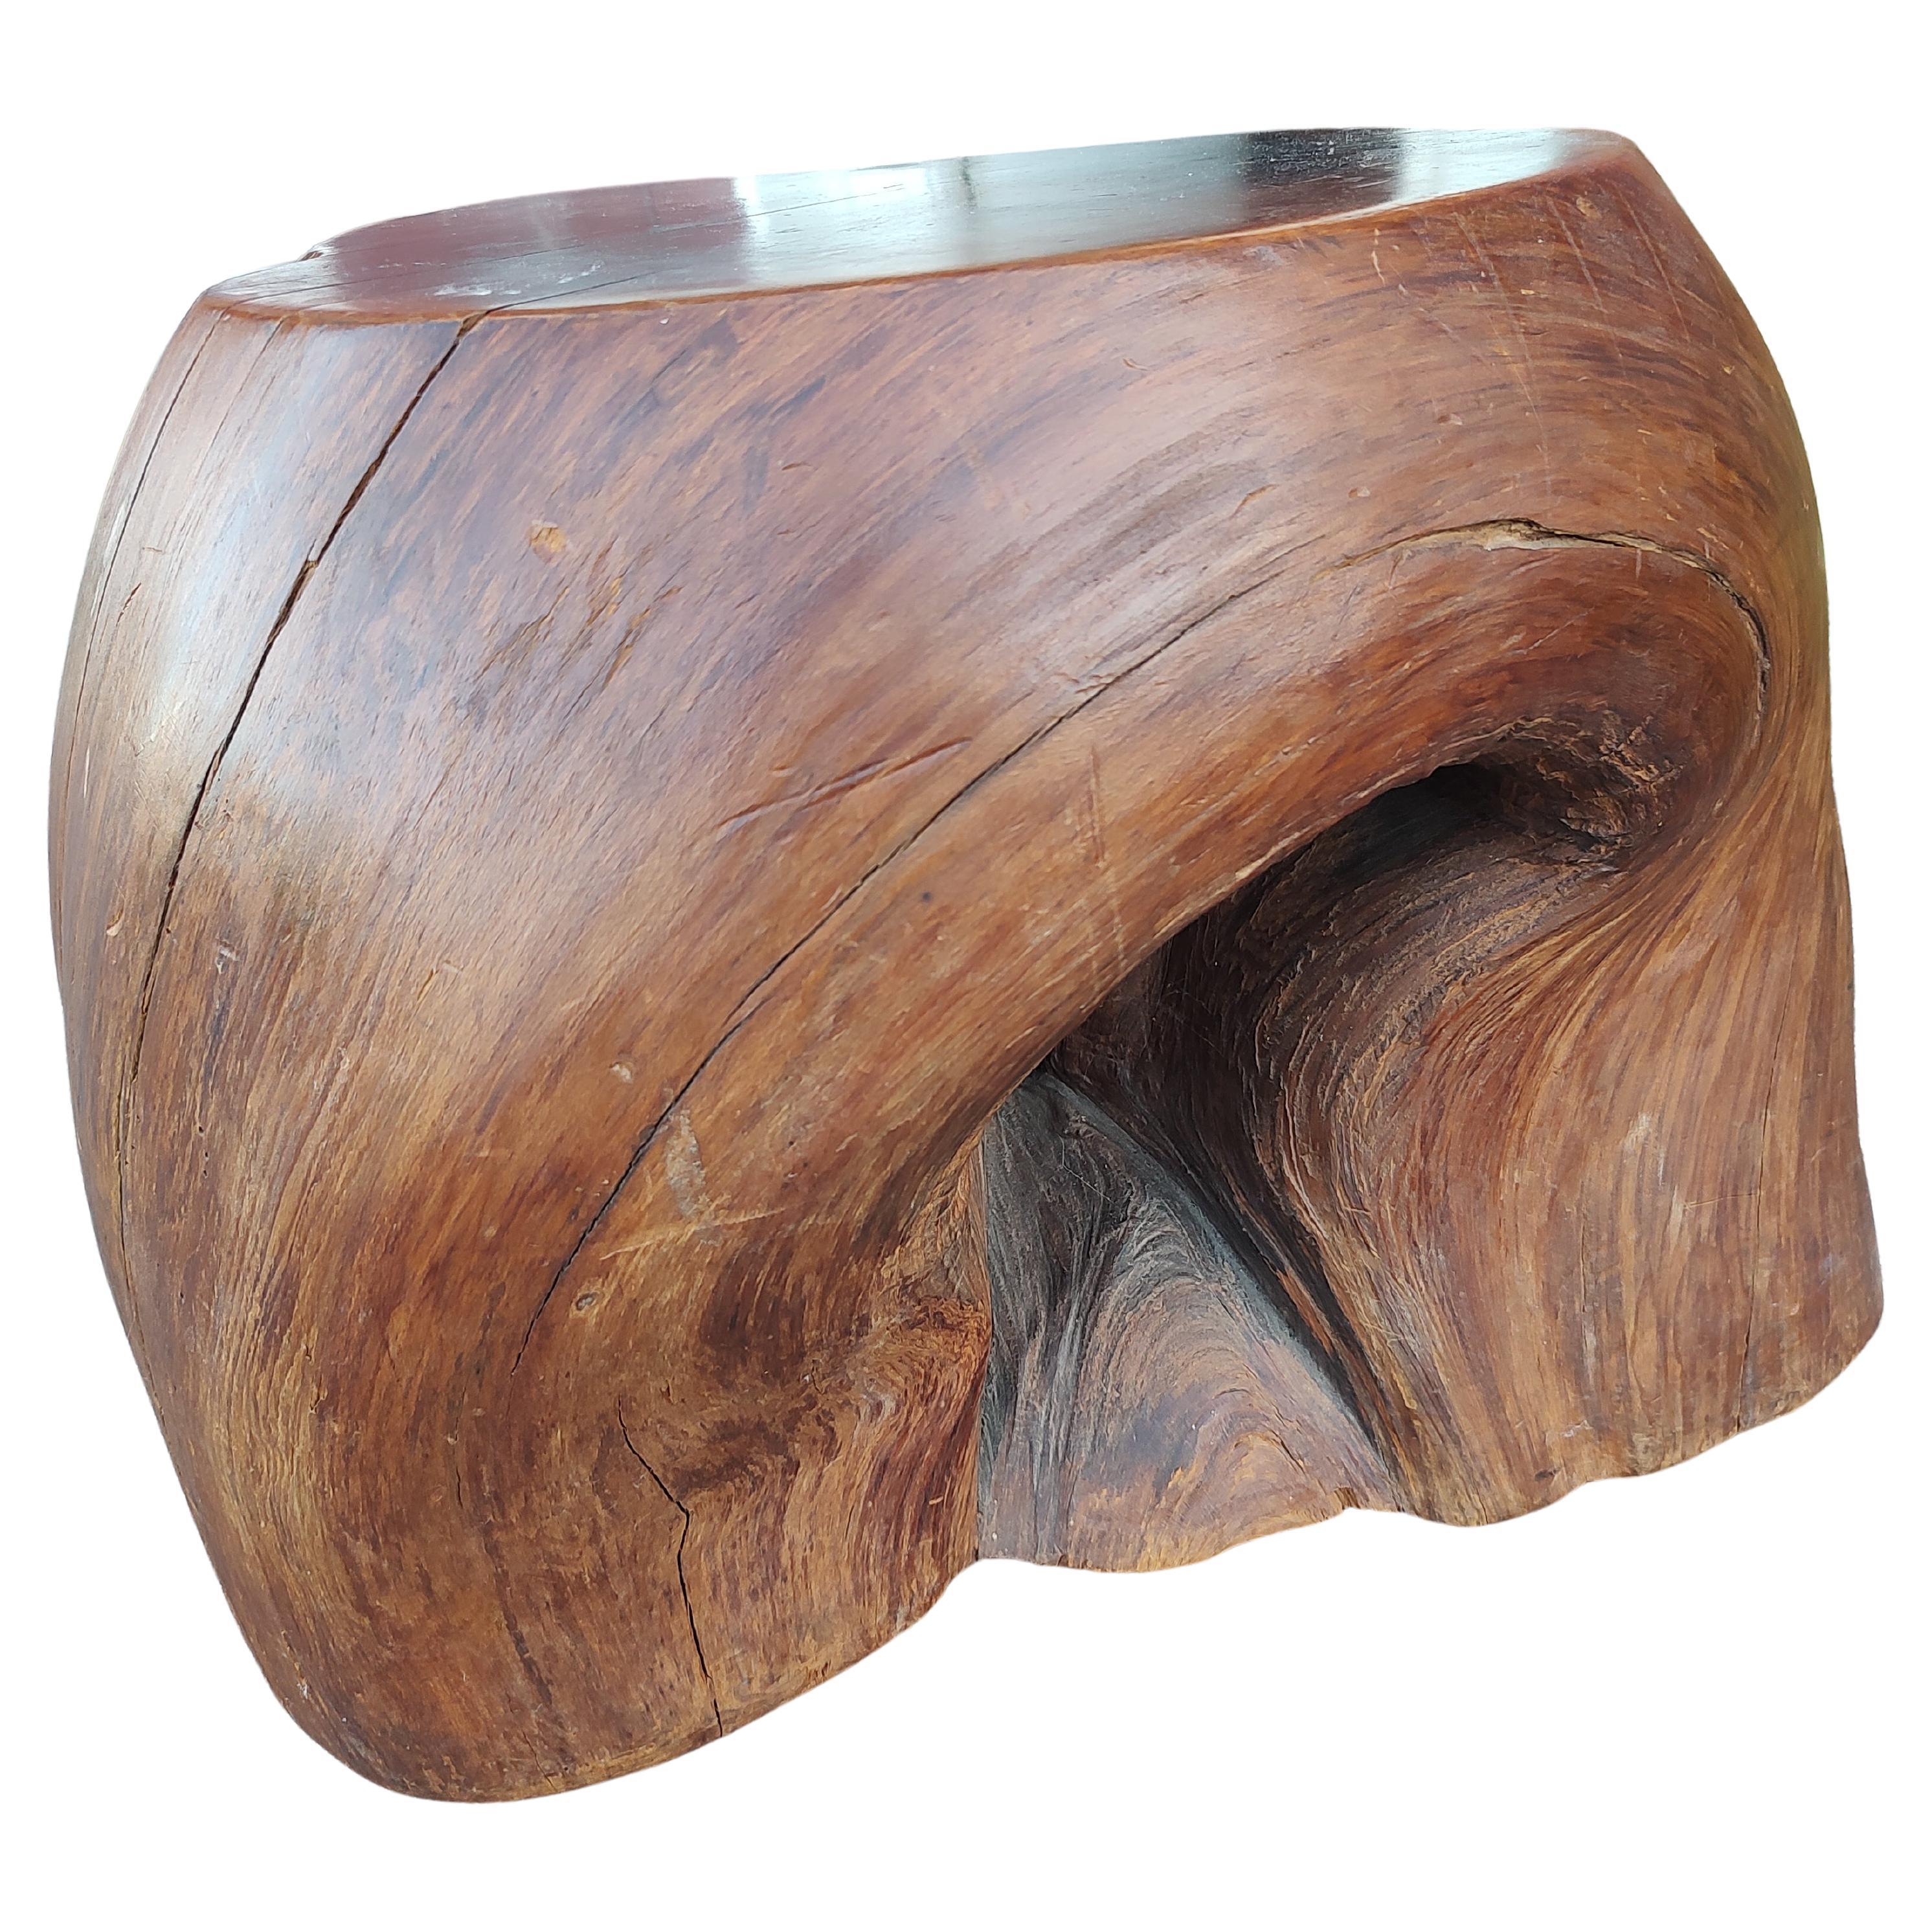 Organic Modern Mid-Century Modern Sculptural Redwood Trunk Cocktail Table For Sale